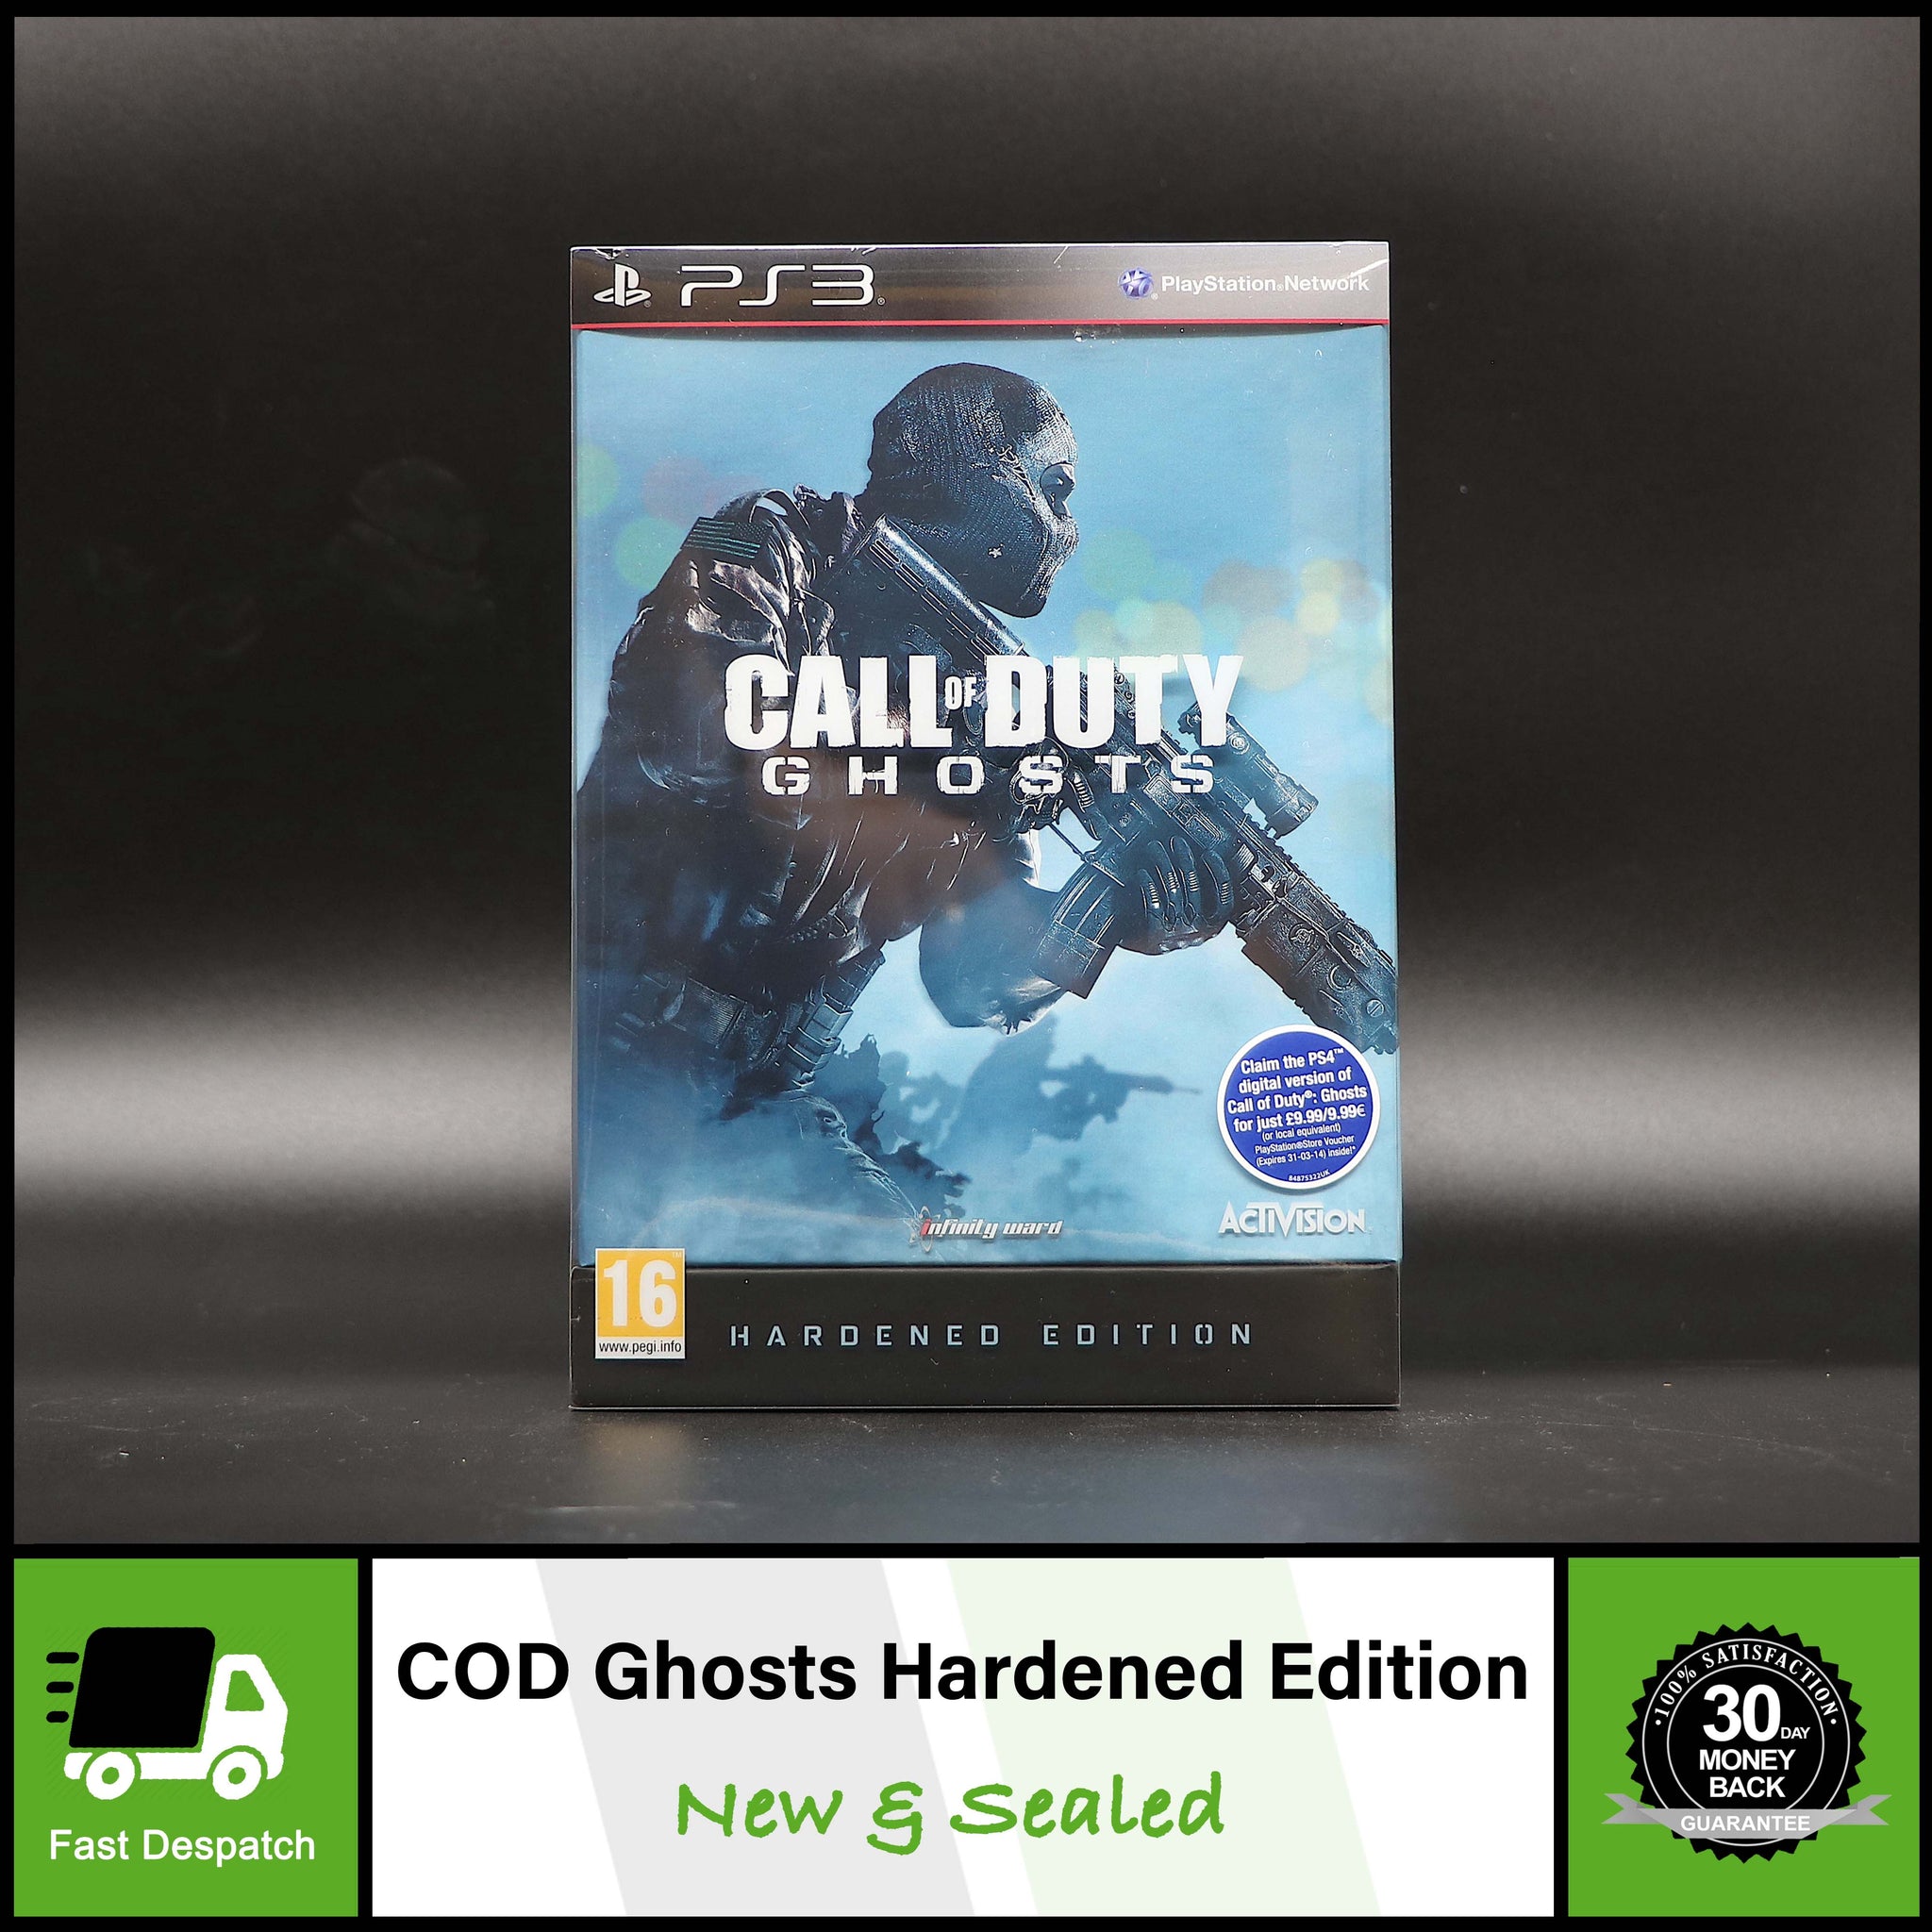 Call of Duty: Ghosts - Replacement PS4 Cover and Case. NO GAME!!